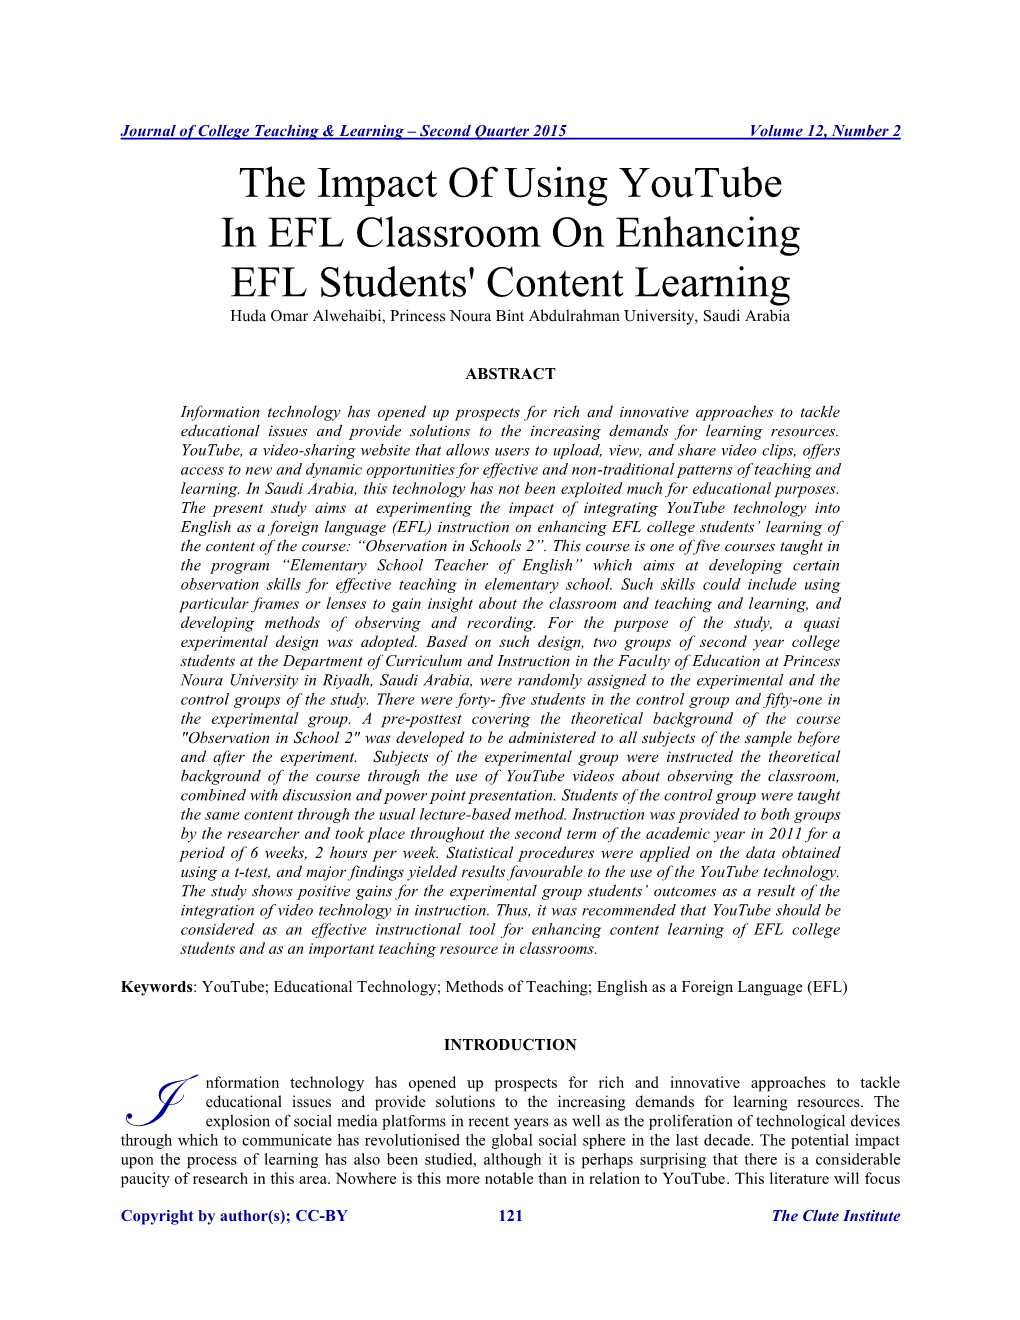 The Impact of Using Youtube in EFL Classroom on Enhancing